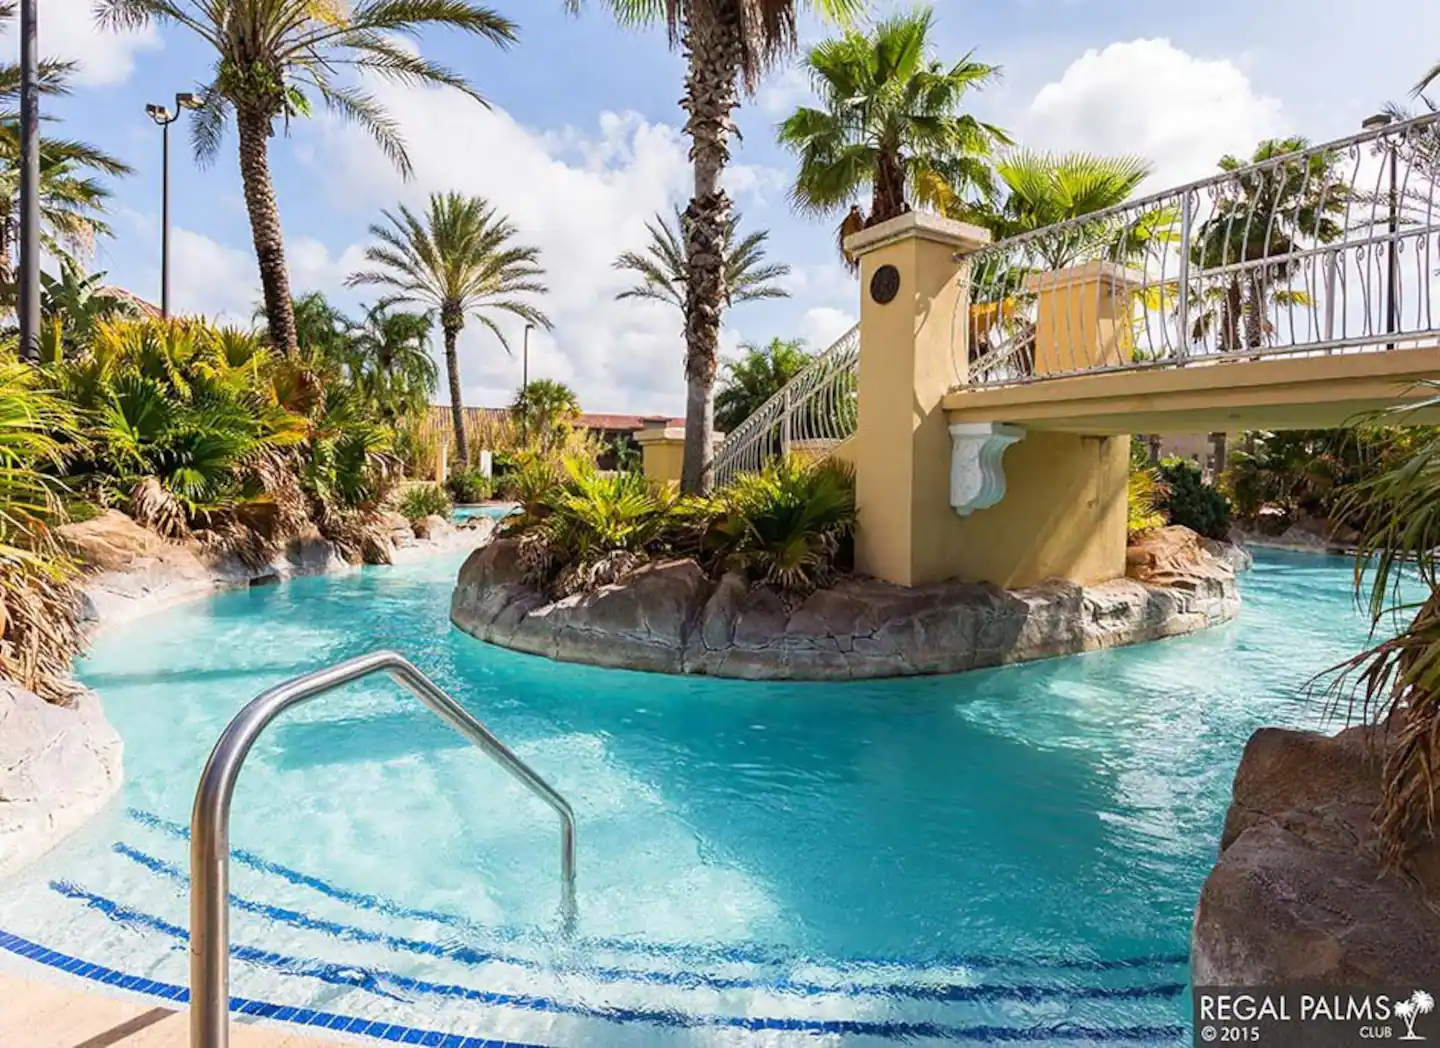 Regal Palms features magnificent pools, water slides, and even a lazy river!